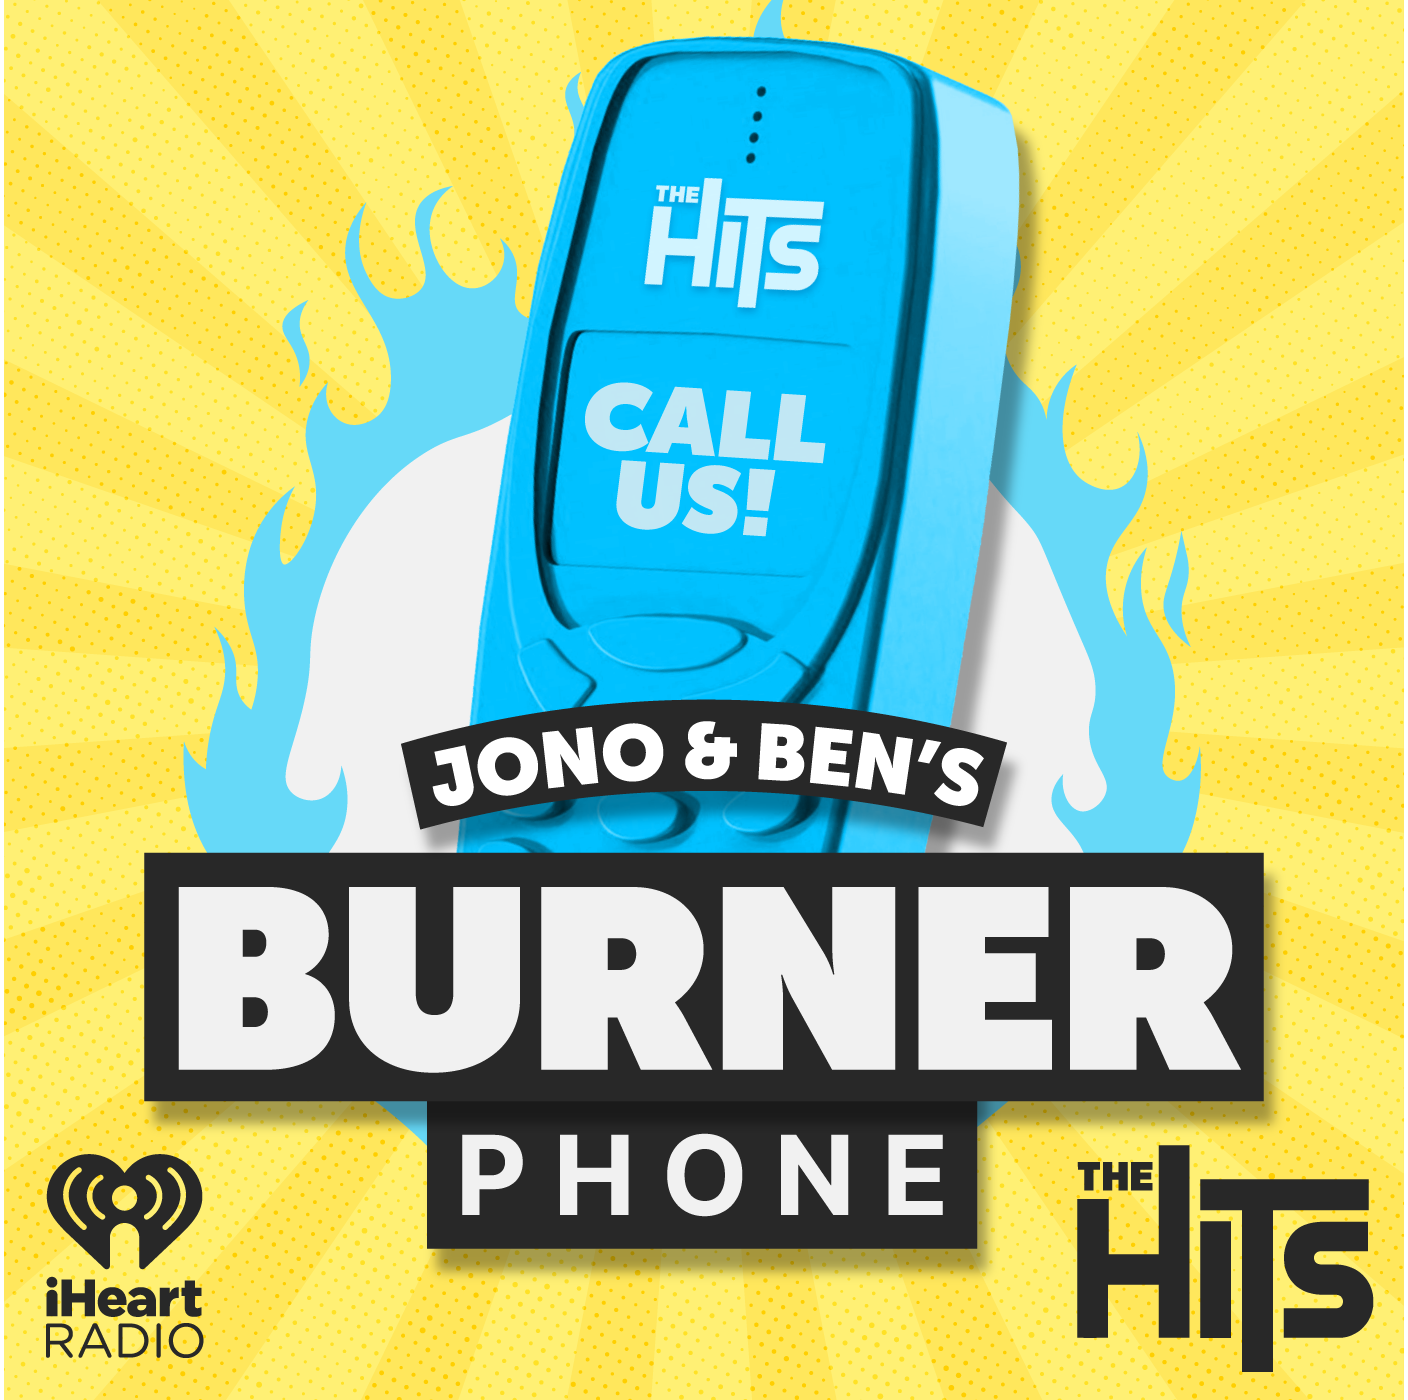 The Burner Phone 69: The Most Pointless Voicemail?